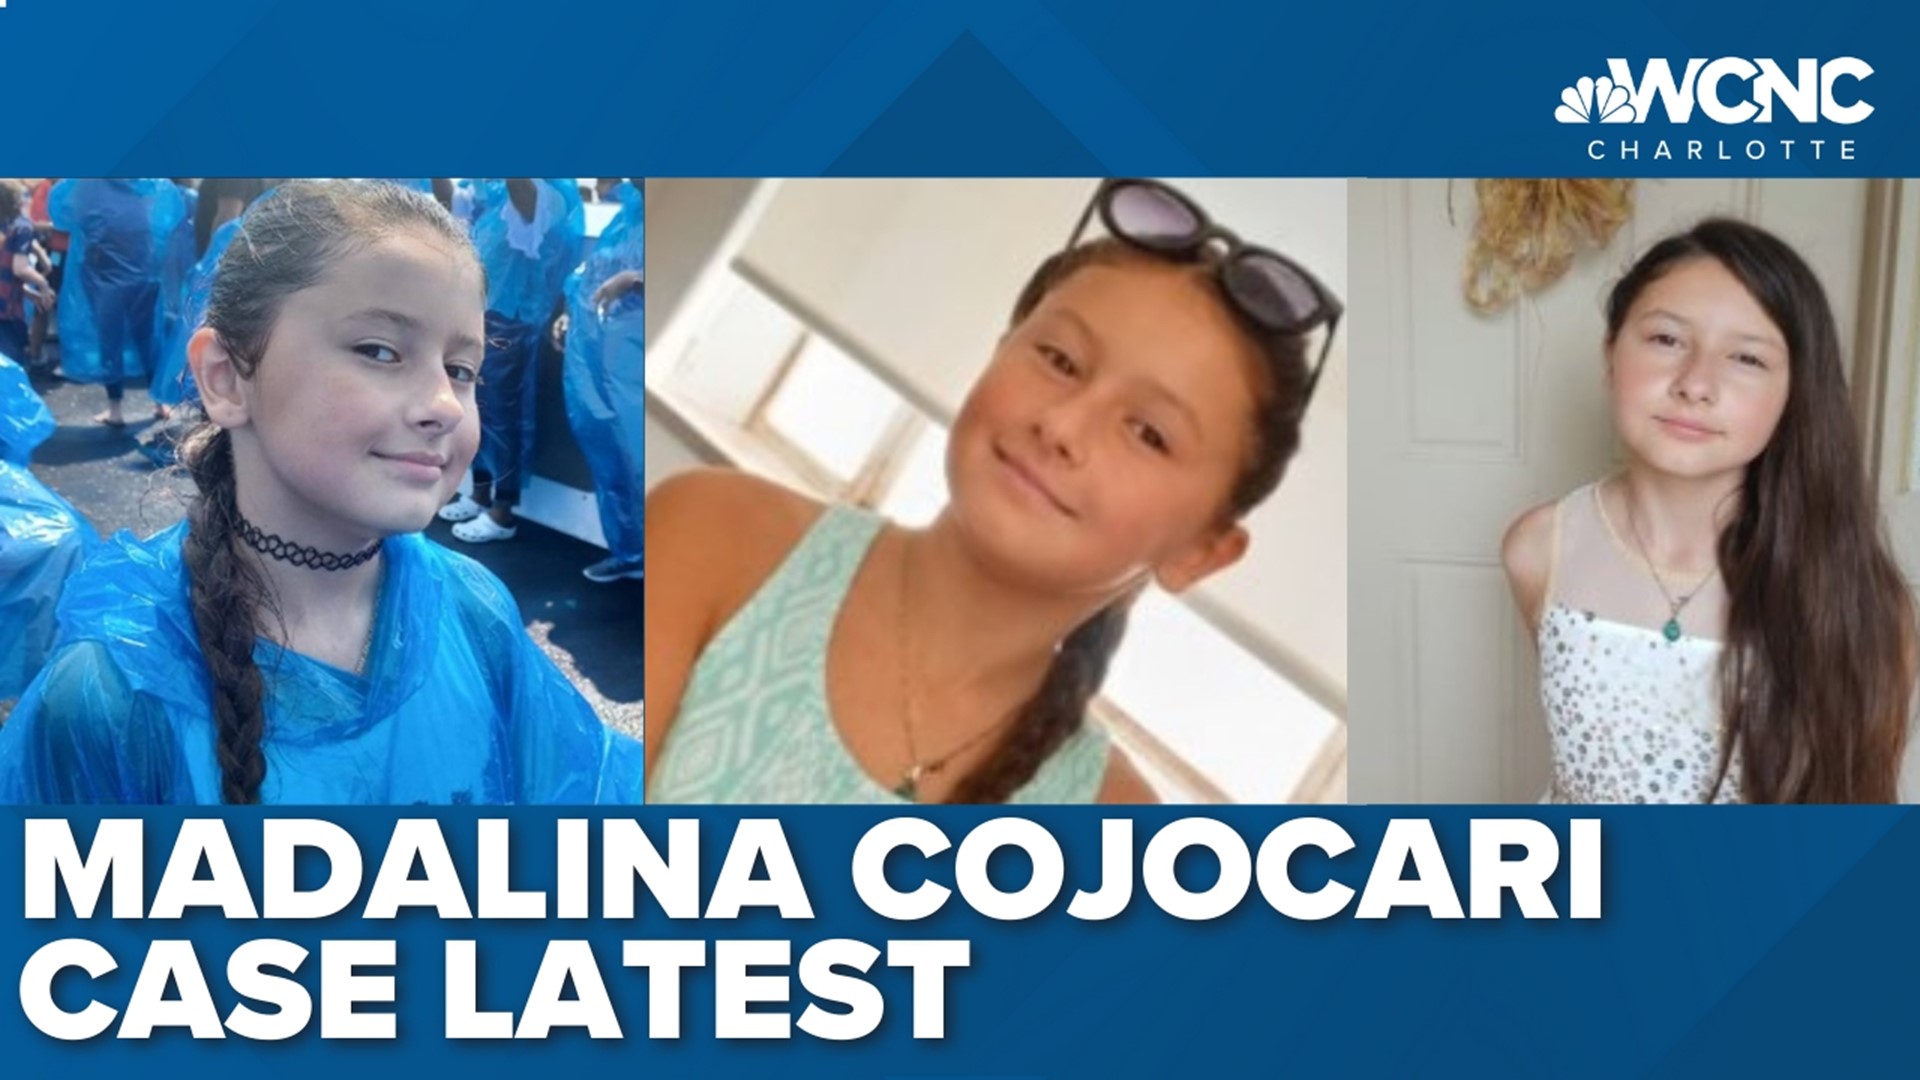 We're now able to see more movement into the investigation into missing 11-year-old Madalina Cojocari.